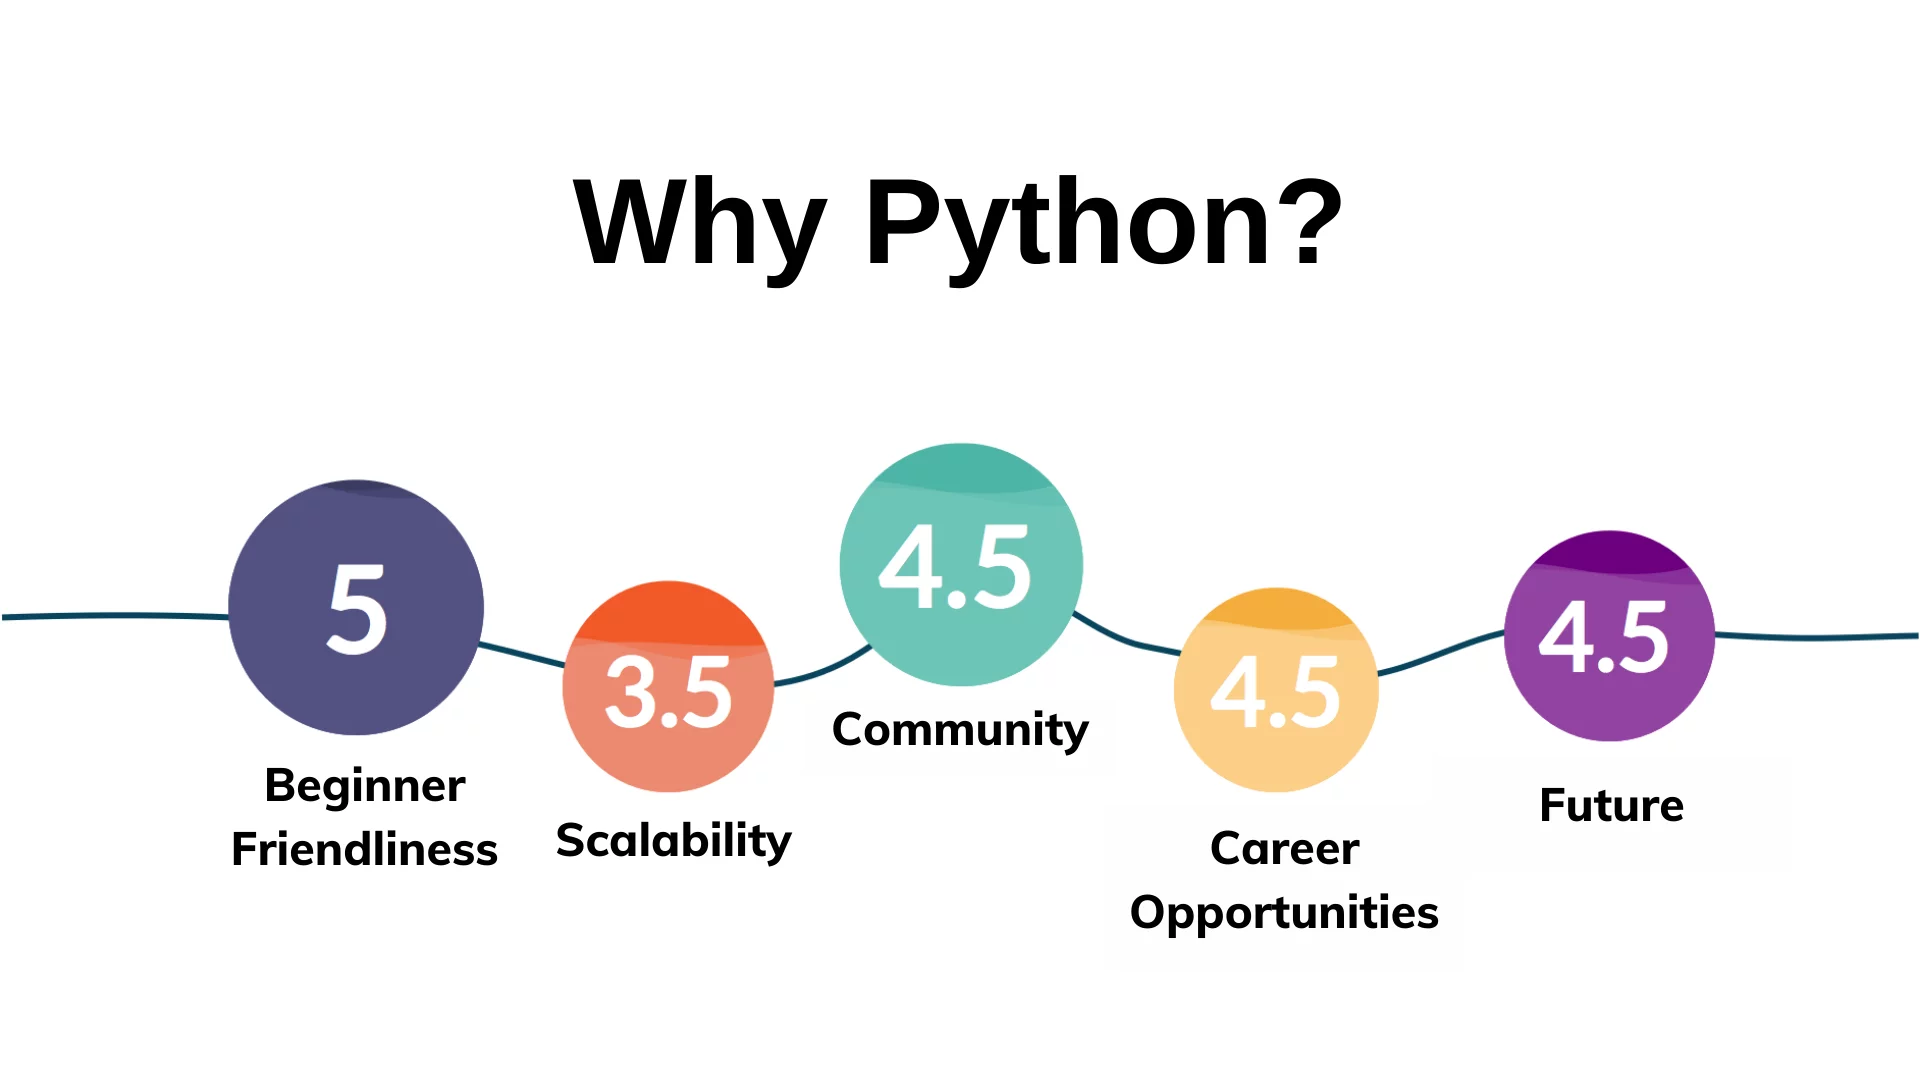 Why Python is more powerful?